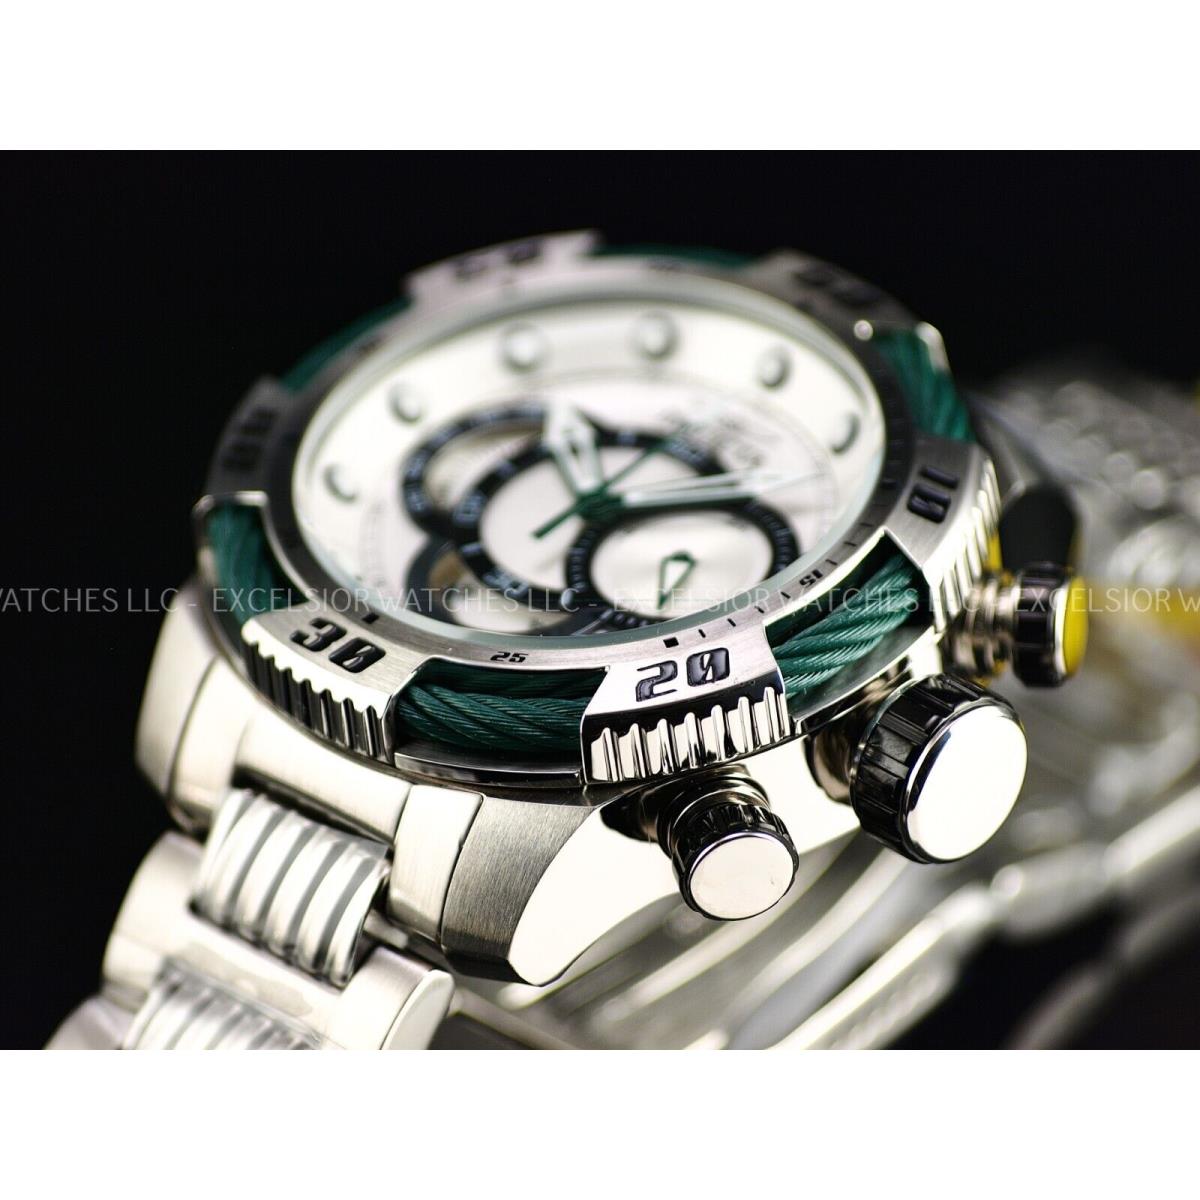 Invicta watch Speedway - Silver Dial, Silver Band, Green Bezel